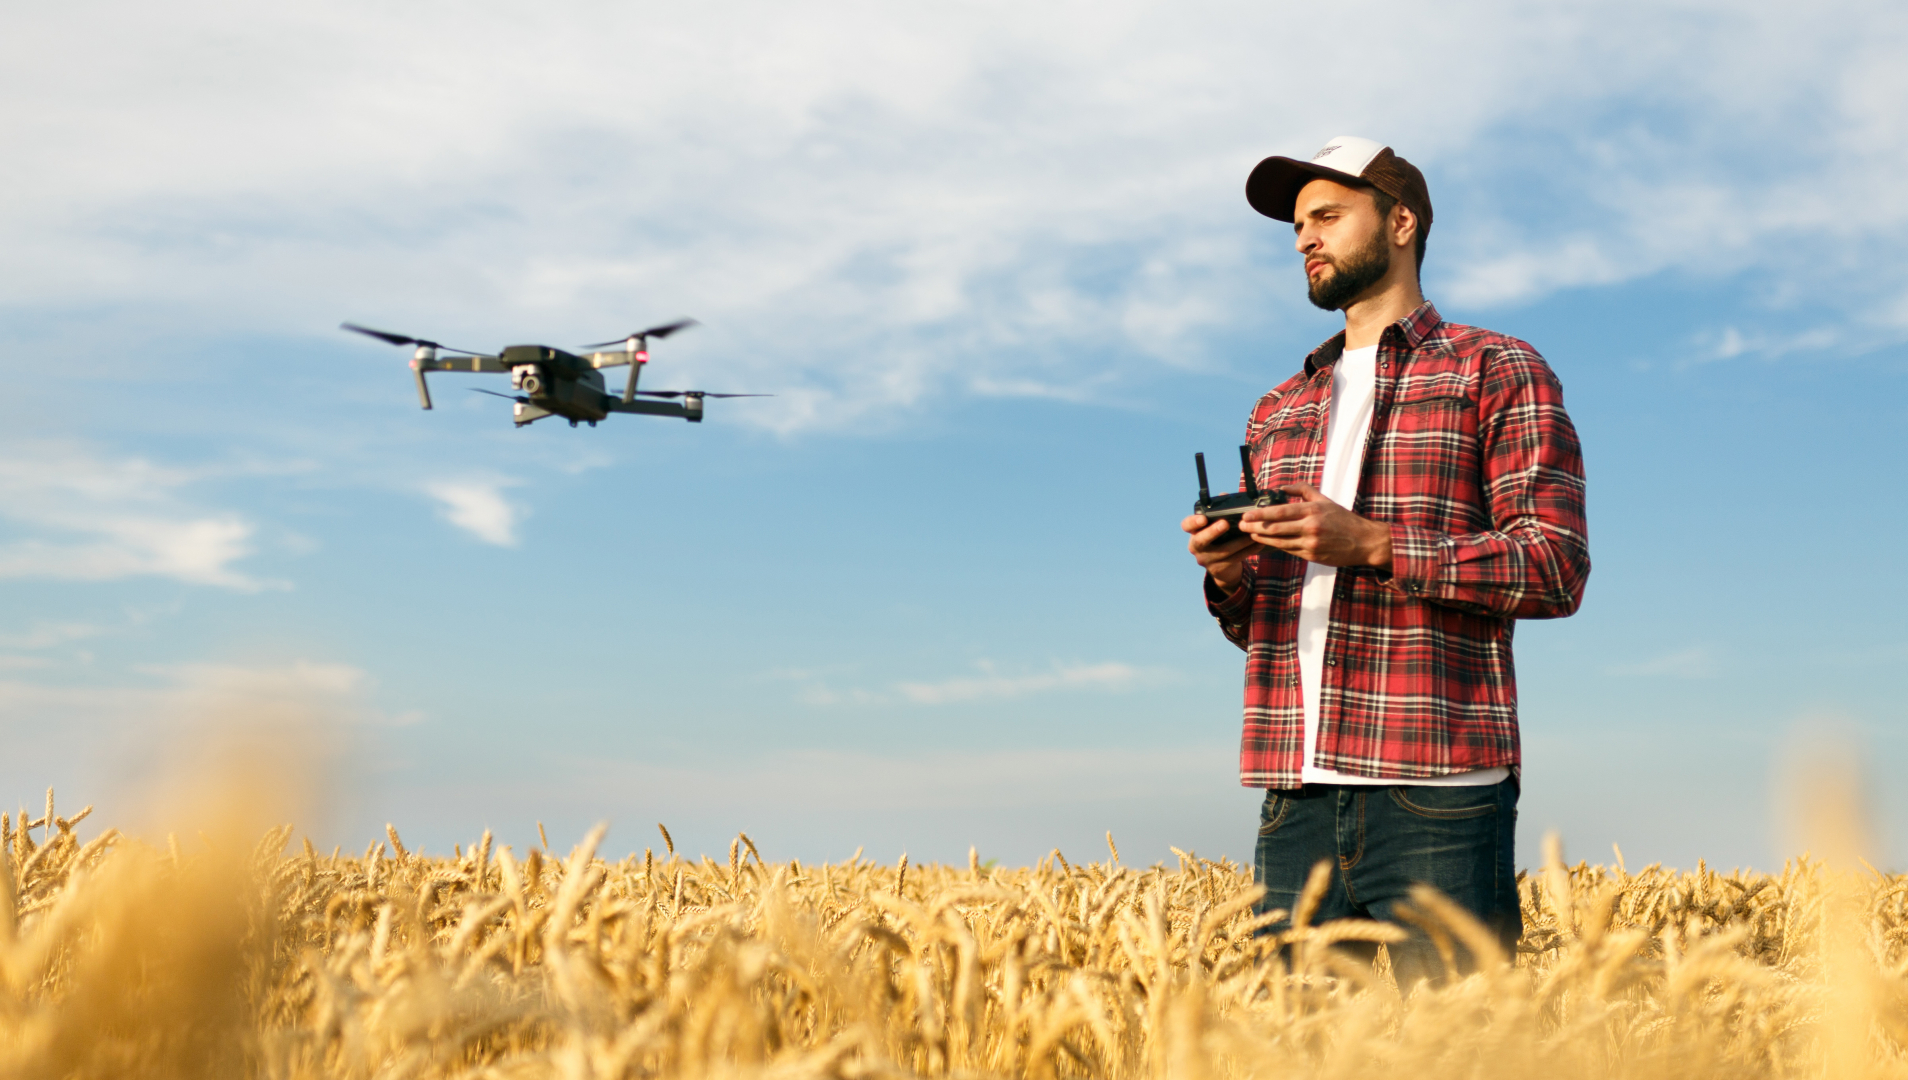 Compact drone hovers in front of farmer with remote controller in his hands.